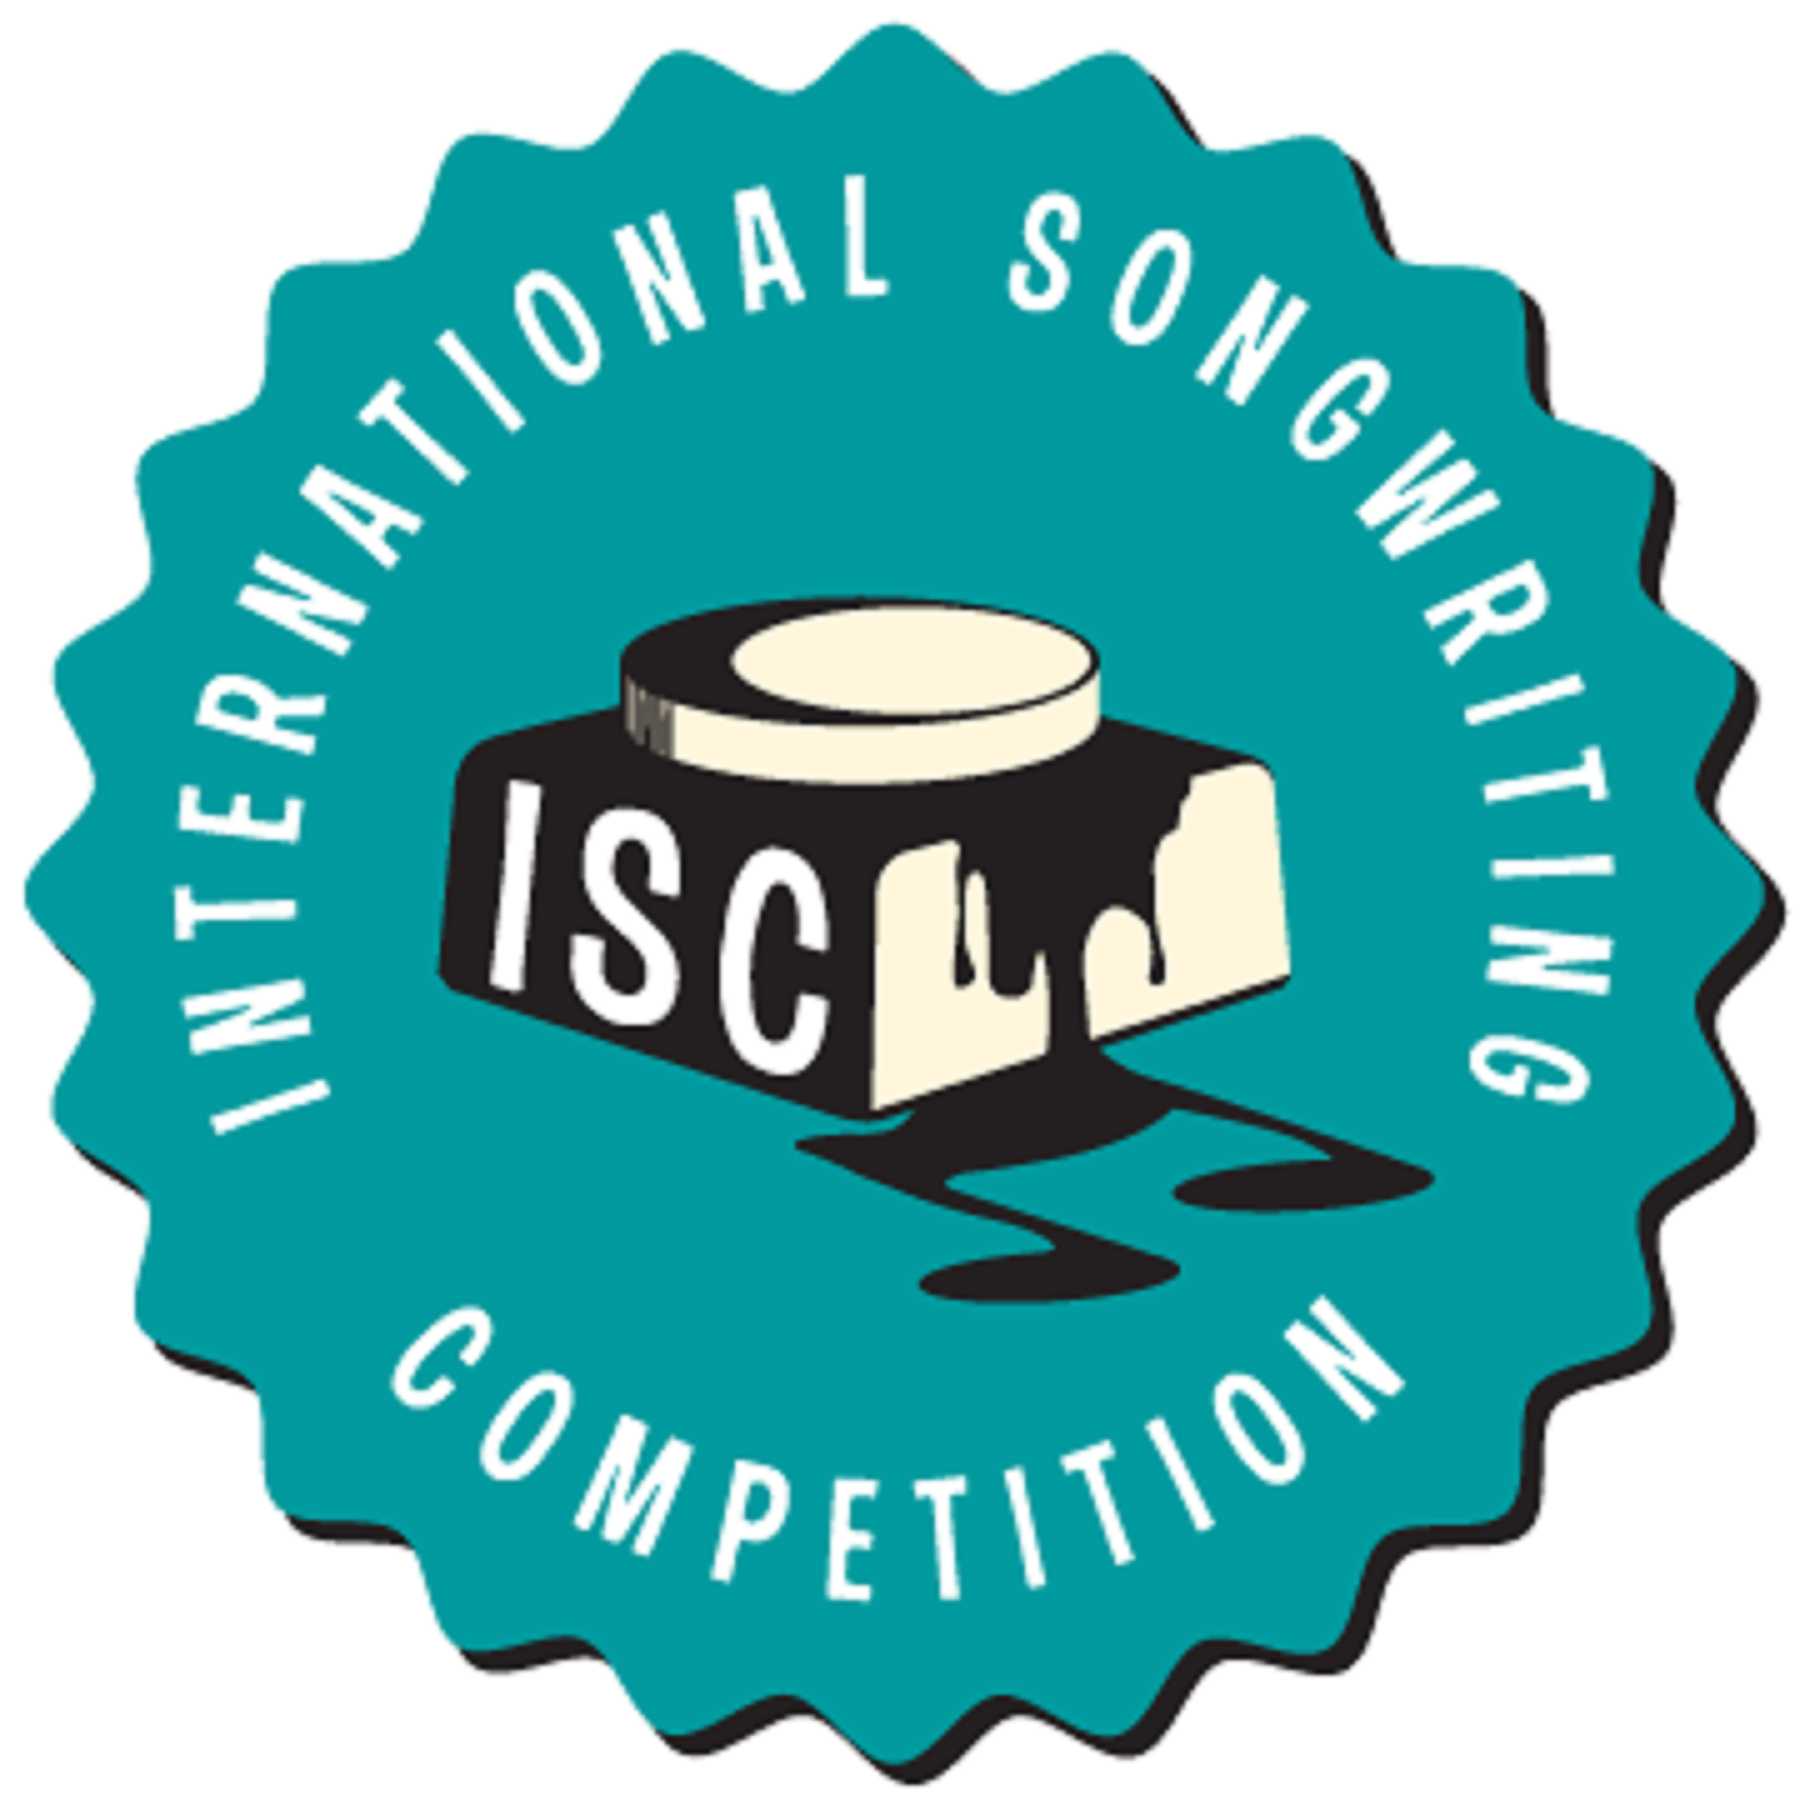 International Songwriting Competition (ISC) has announced winners for its latest competition,